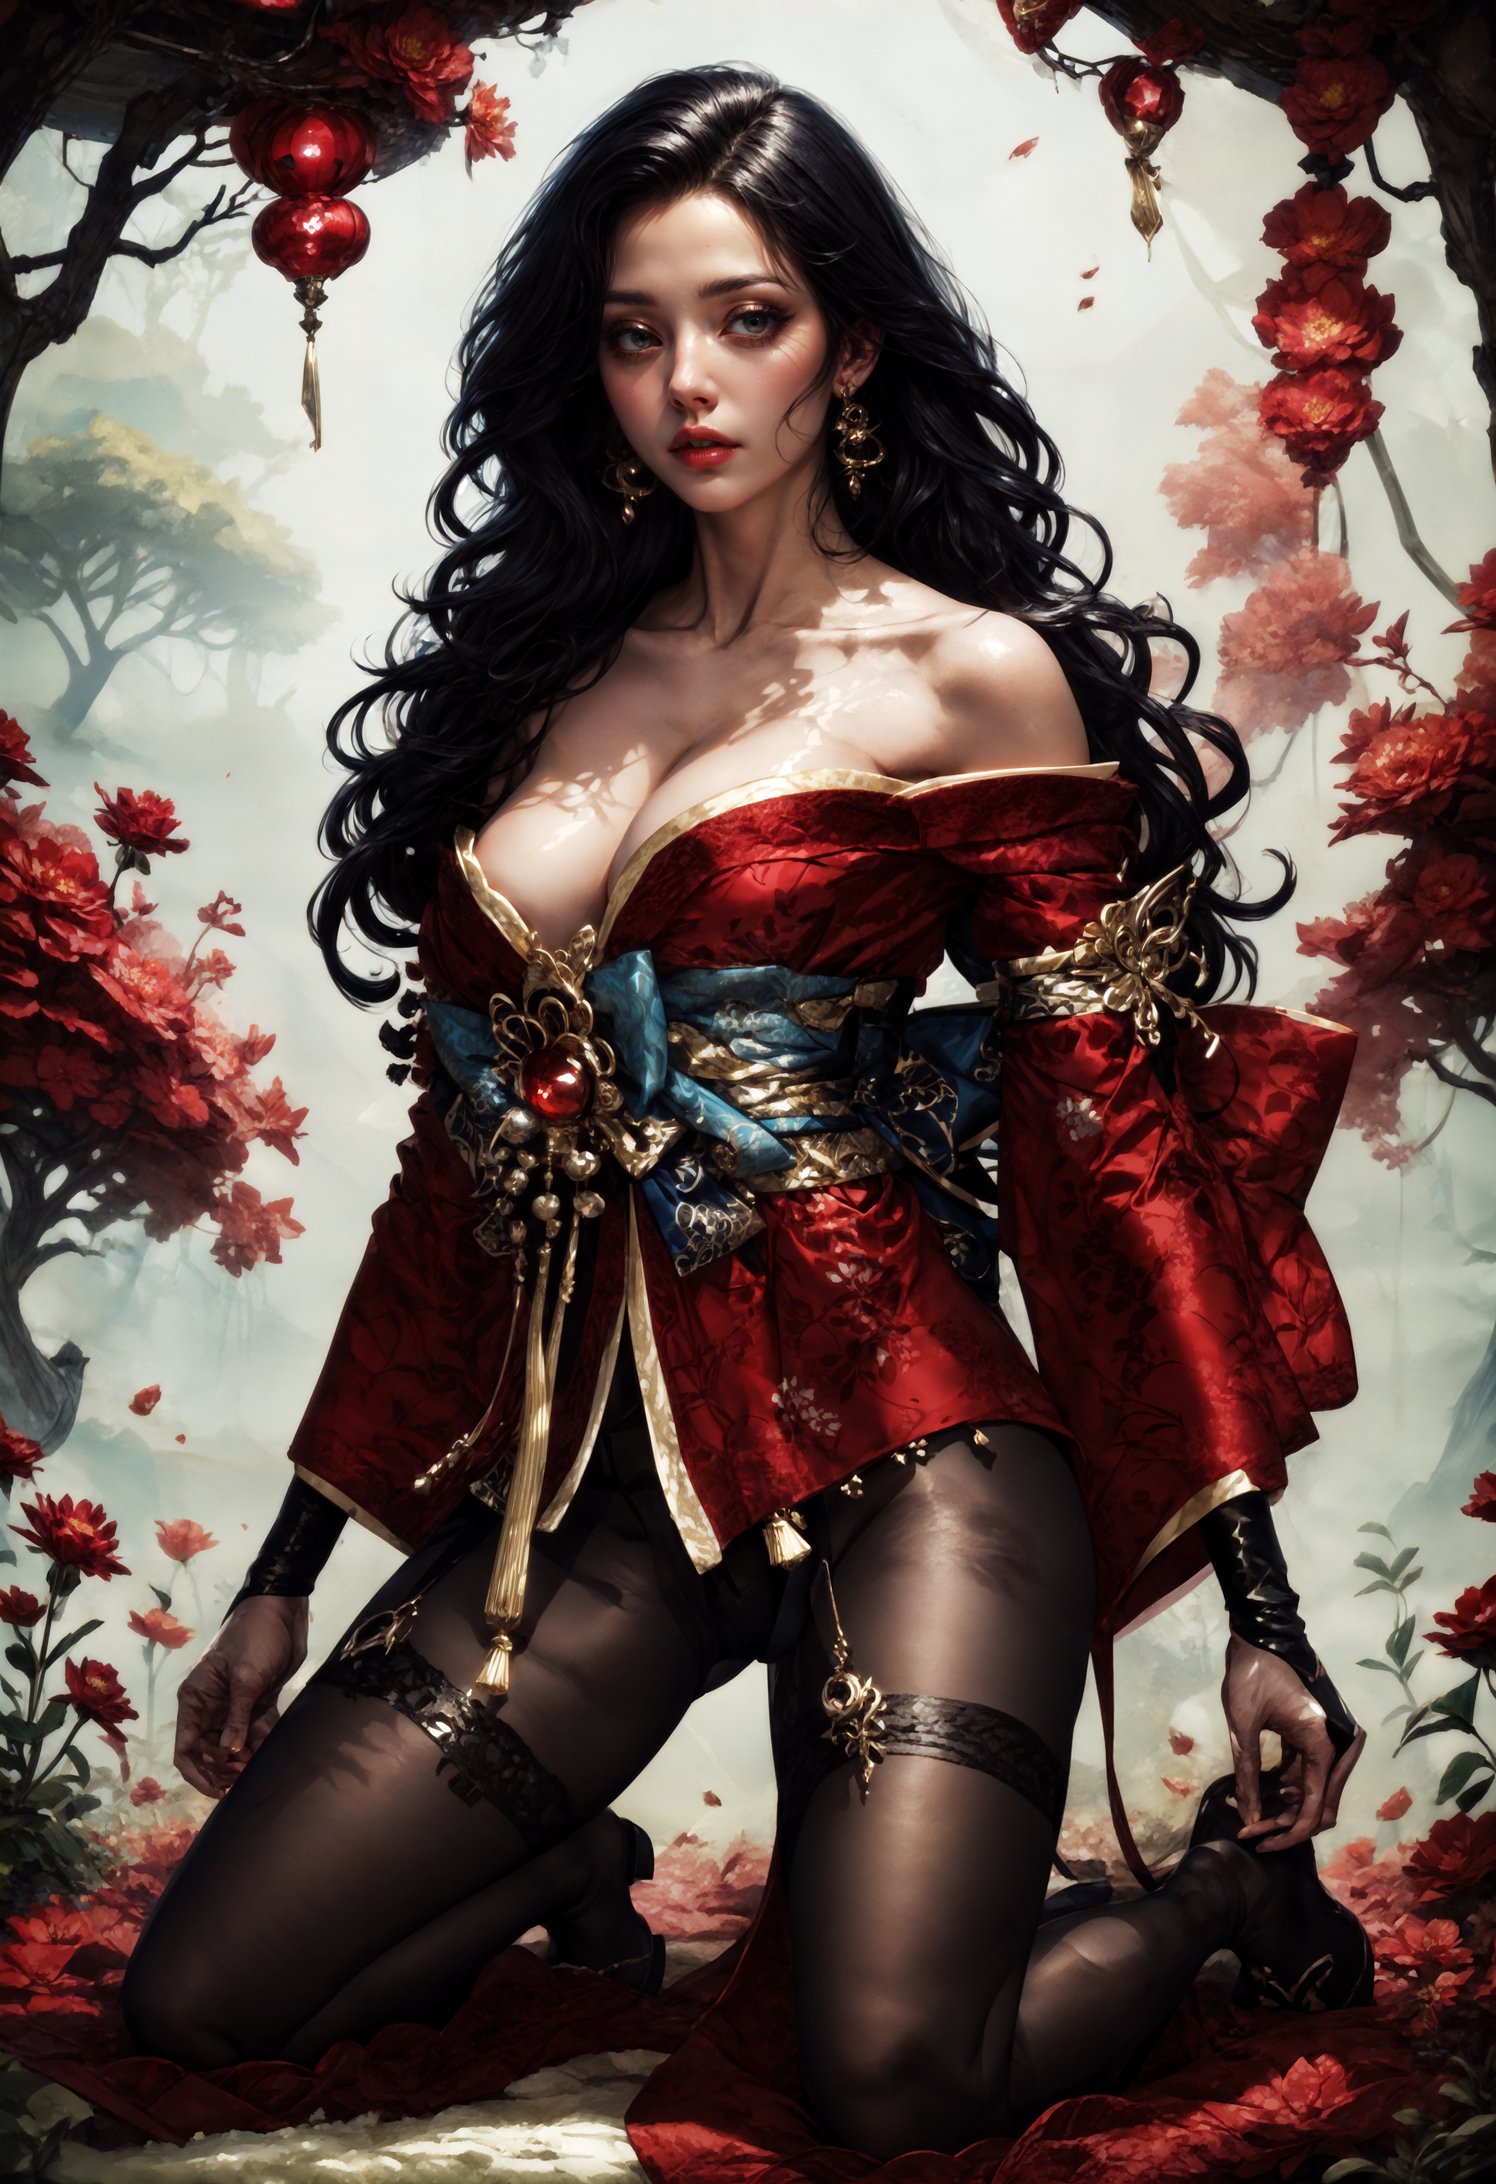 score_9, score_8_up, score_7_up,  perfect body, seiza, kneeling on flowers, flower bed, nature, red theme, (bright background, in a forest), bold posing, stretched arms, falling flower petals,  BREAK,  highly detailed,  (realistic, concept art), shiny jewelry, gem earrings, long hair,   LAassunity, kimono, pantyhose,  garter strap, <lora:LAassunityXL:0.9>   <lora:Kenva:0.8> knva,   <lora:Concept Art Twilight Style SDXL_LoRA_Pony Diffusion V6 XL:0.8> <lora:Expressive_H:0.8> expressiveh   <lora:sinfully_stylish_SDKL:0.8>